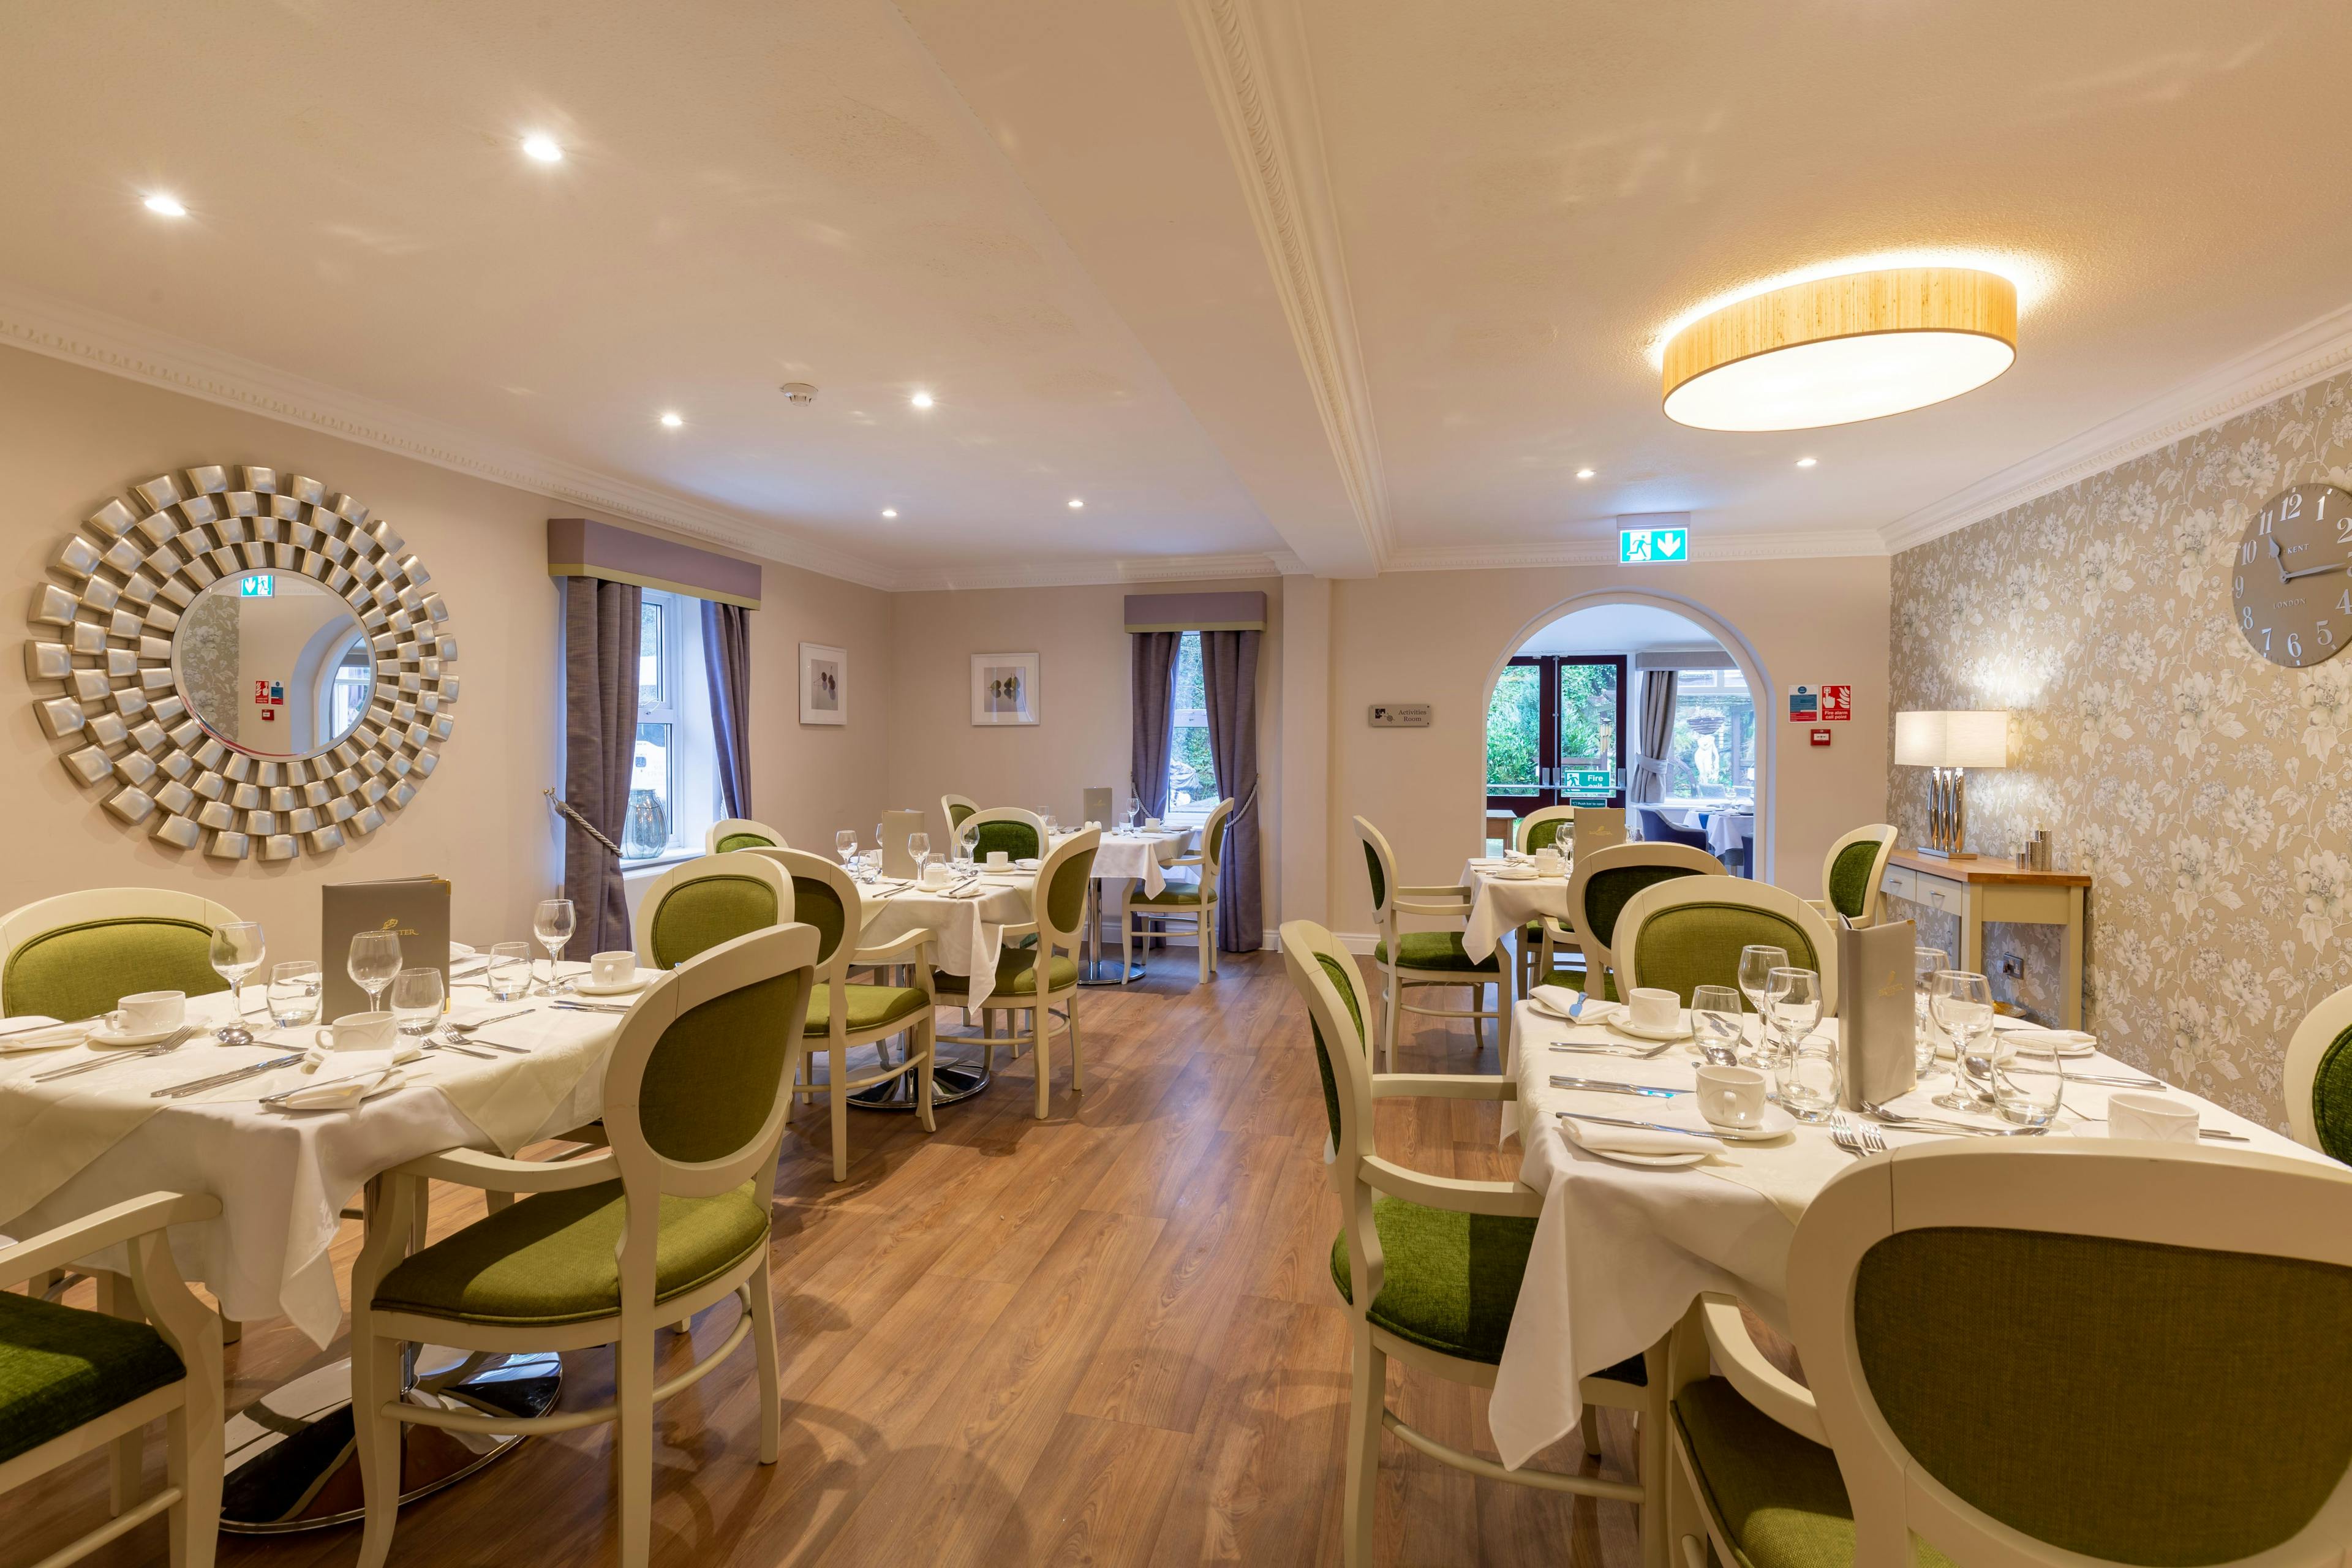 Dining Room at South Chowdene Care Home in Gateshead, Tyne and Wear